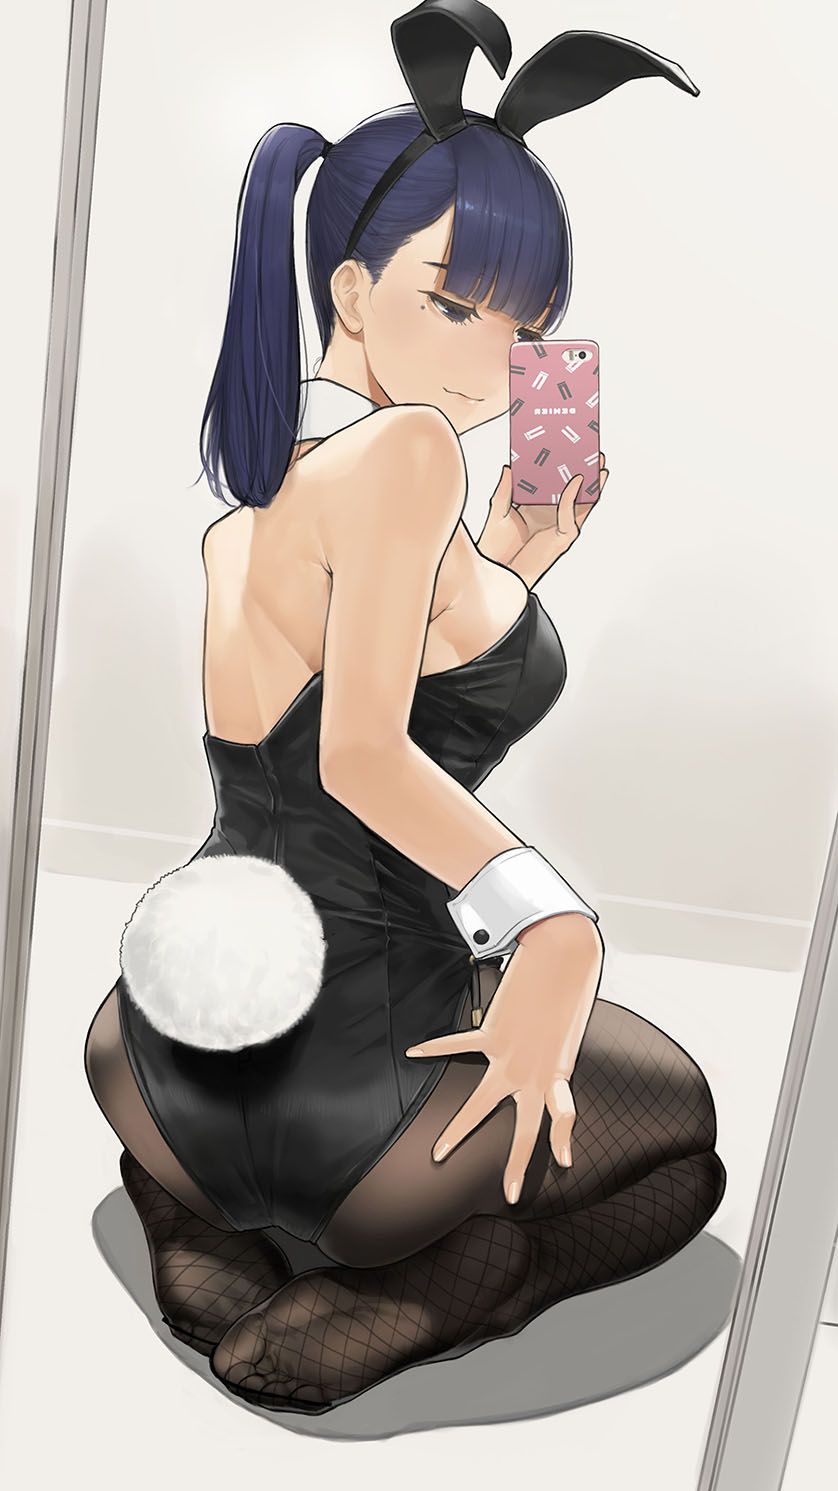 [2nd] Second erotic image of a cute ponytail girl part 19 [ponytail] 23